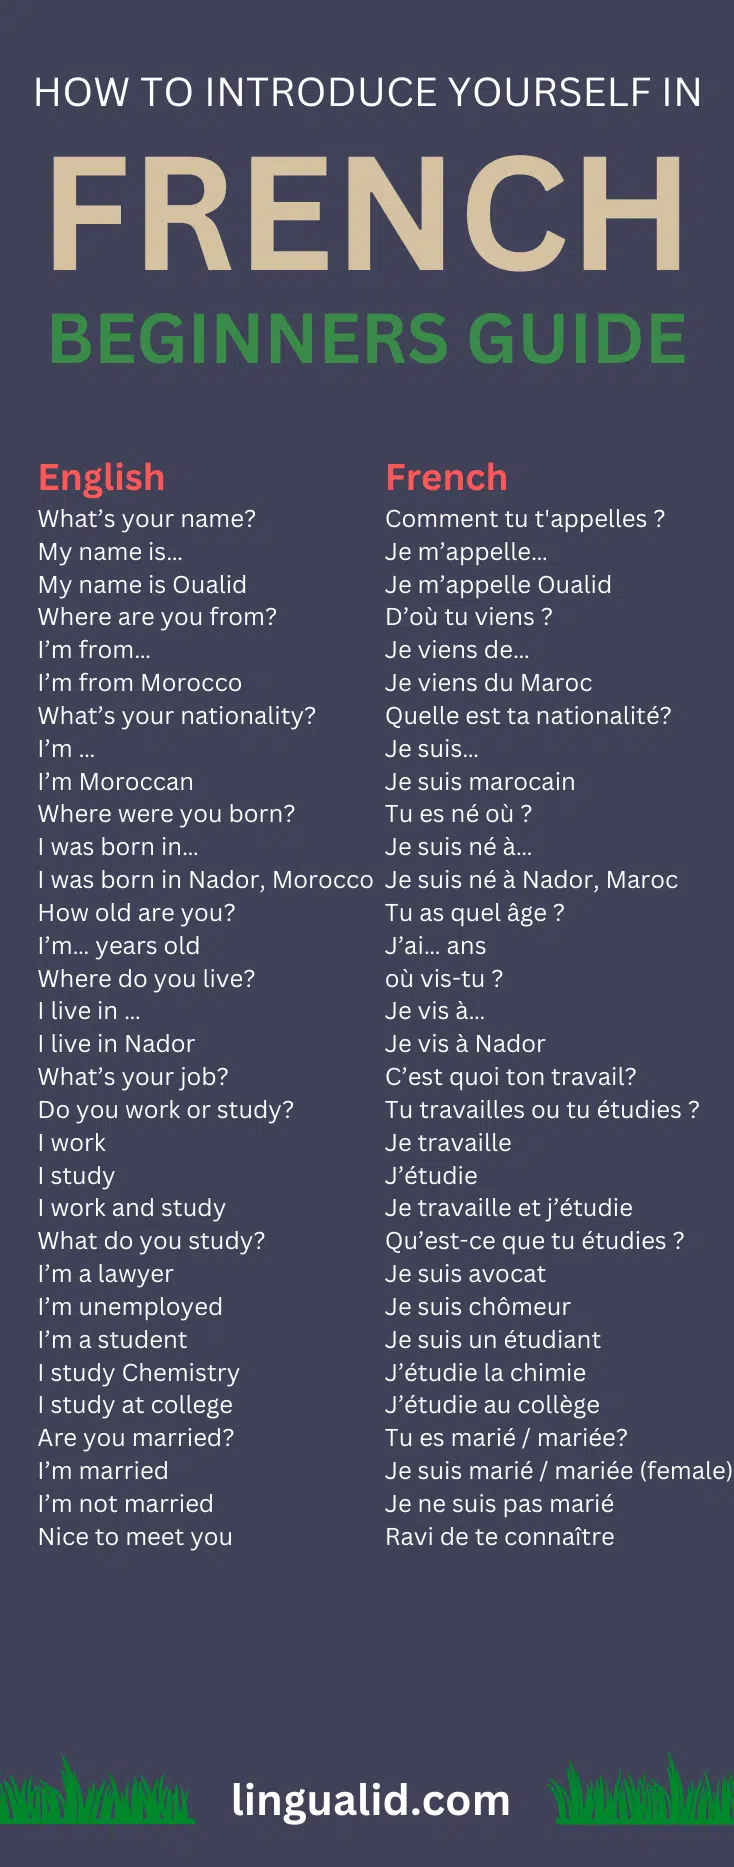 How To Introduce Yourself In French visual